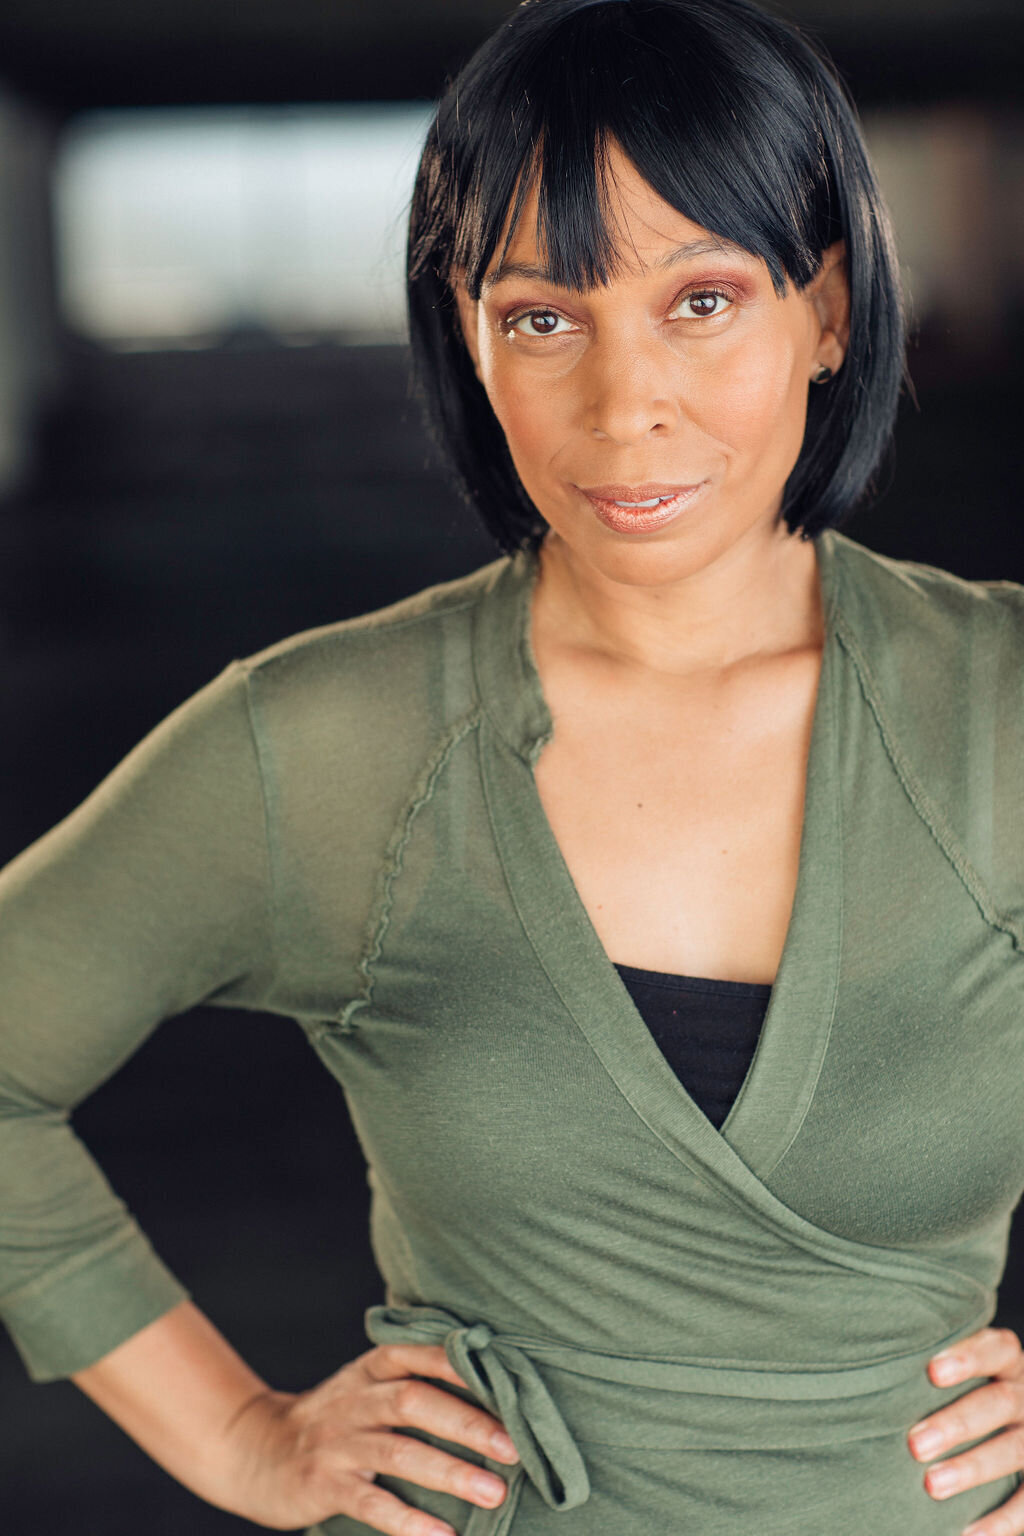 Headshot Photograph Of Woman In Green Blouse And Inner Black Tank Top Los Angeles